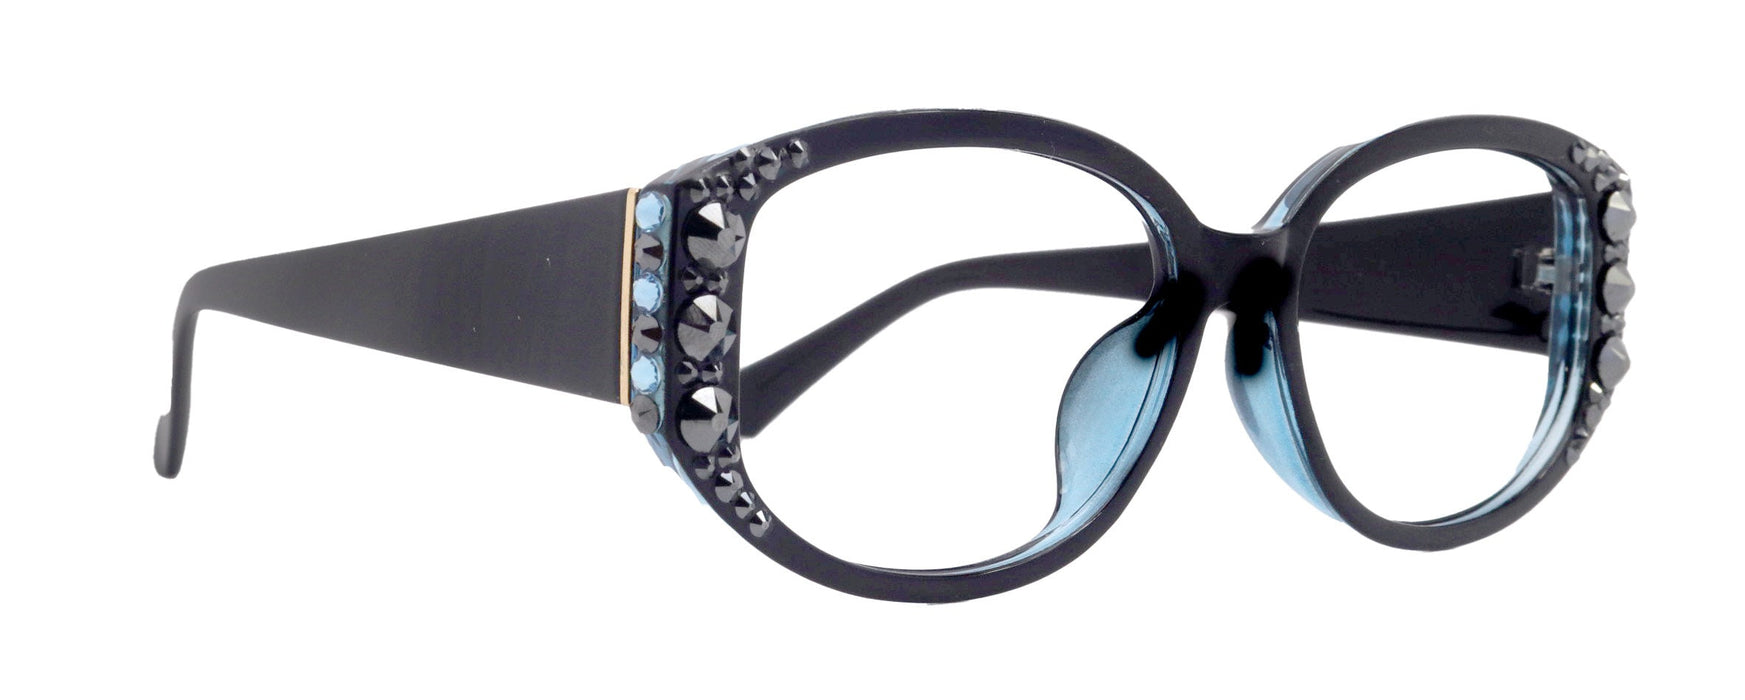 Oversized Bling Reading Glasses, Hematite W Aquamarine, Large Frame, High End Readers, Bifocal, Sun readers, Trendy Style, NY Fifth Avenue